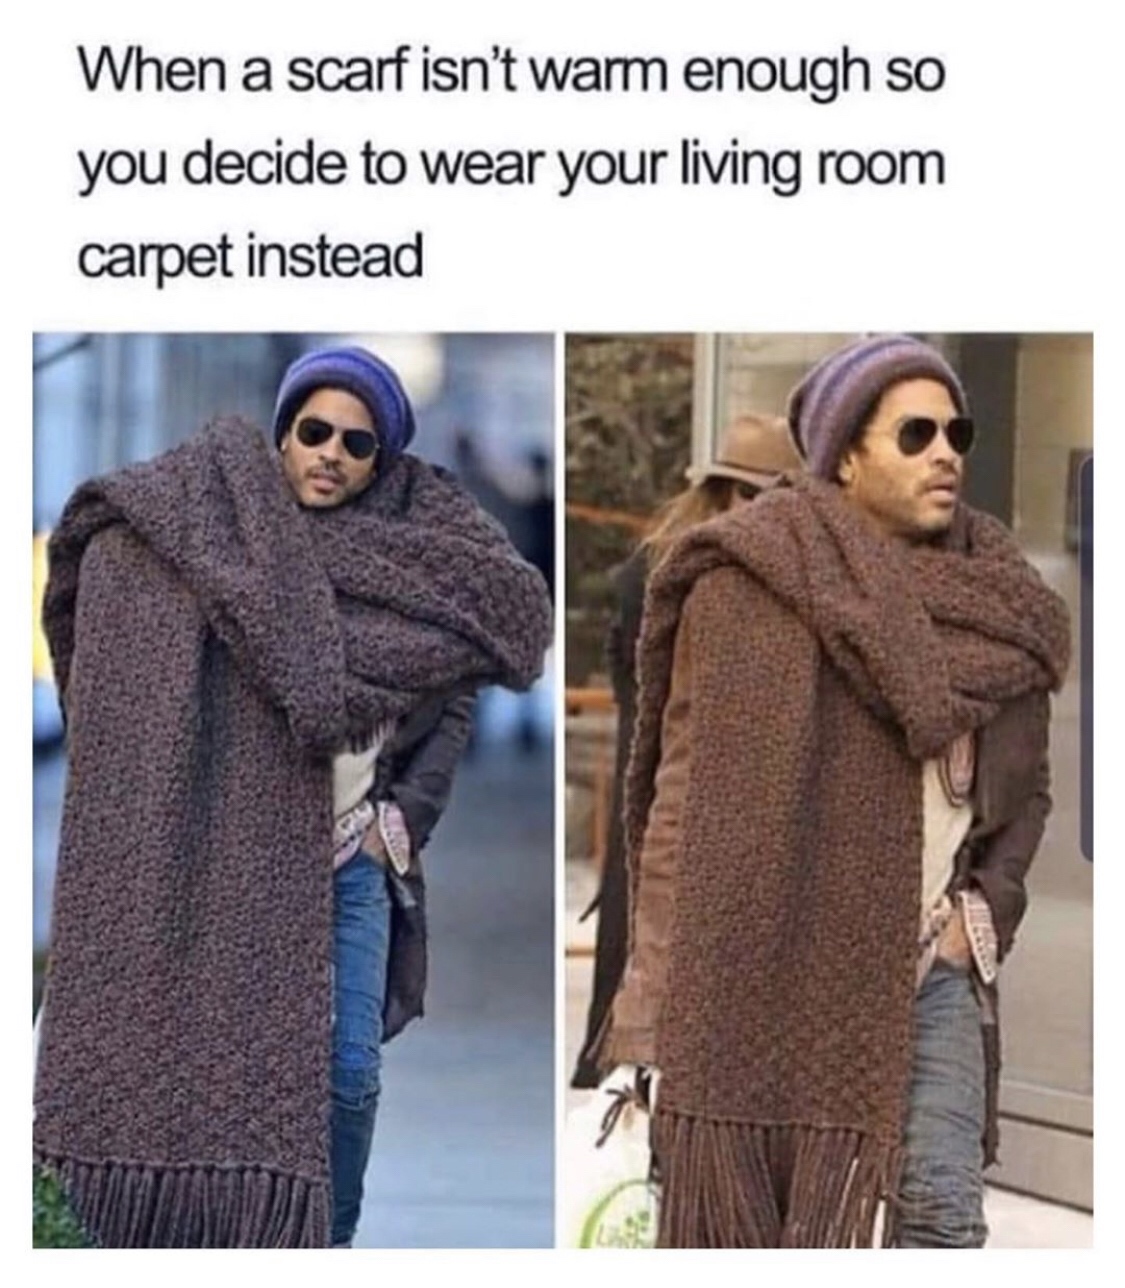 funny fashion memes - When a scarf isn't warm enough so you decide to wear your living room carpet instead